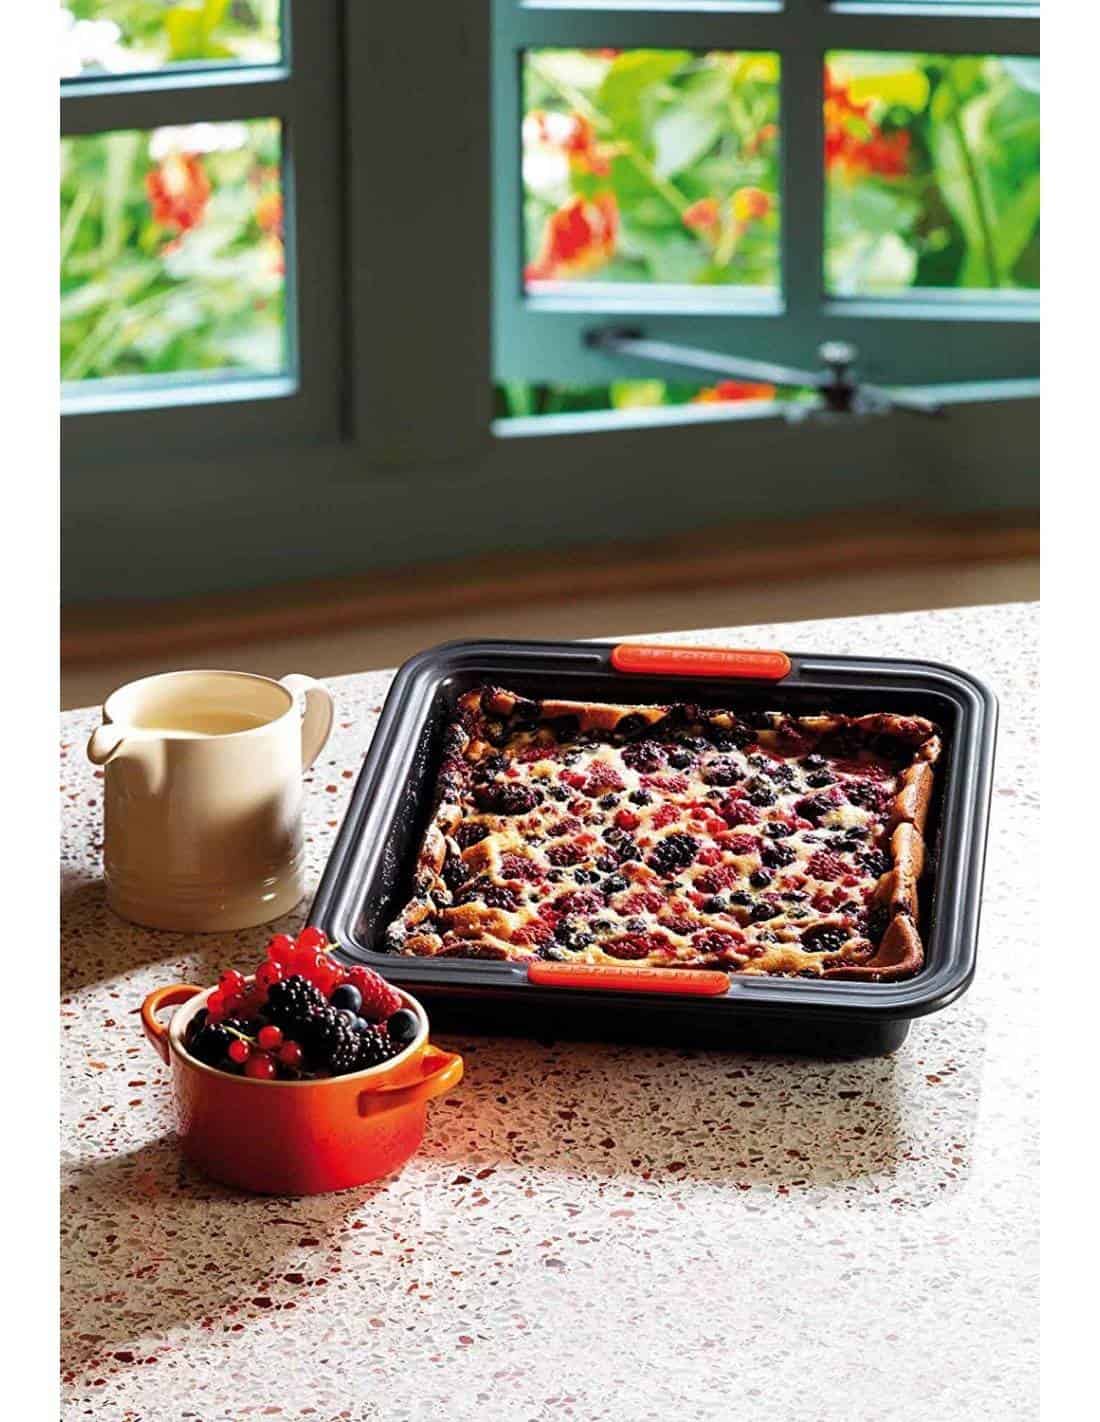 https://www.mimocook.com/20030-thickbox_default/le-creuset-toughened-non-stick-bakeware-square-cake-tin-23-cm.jpg